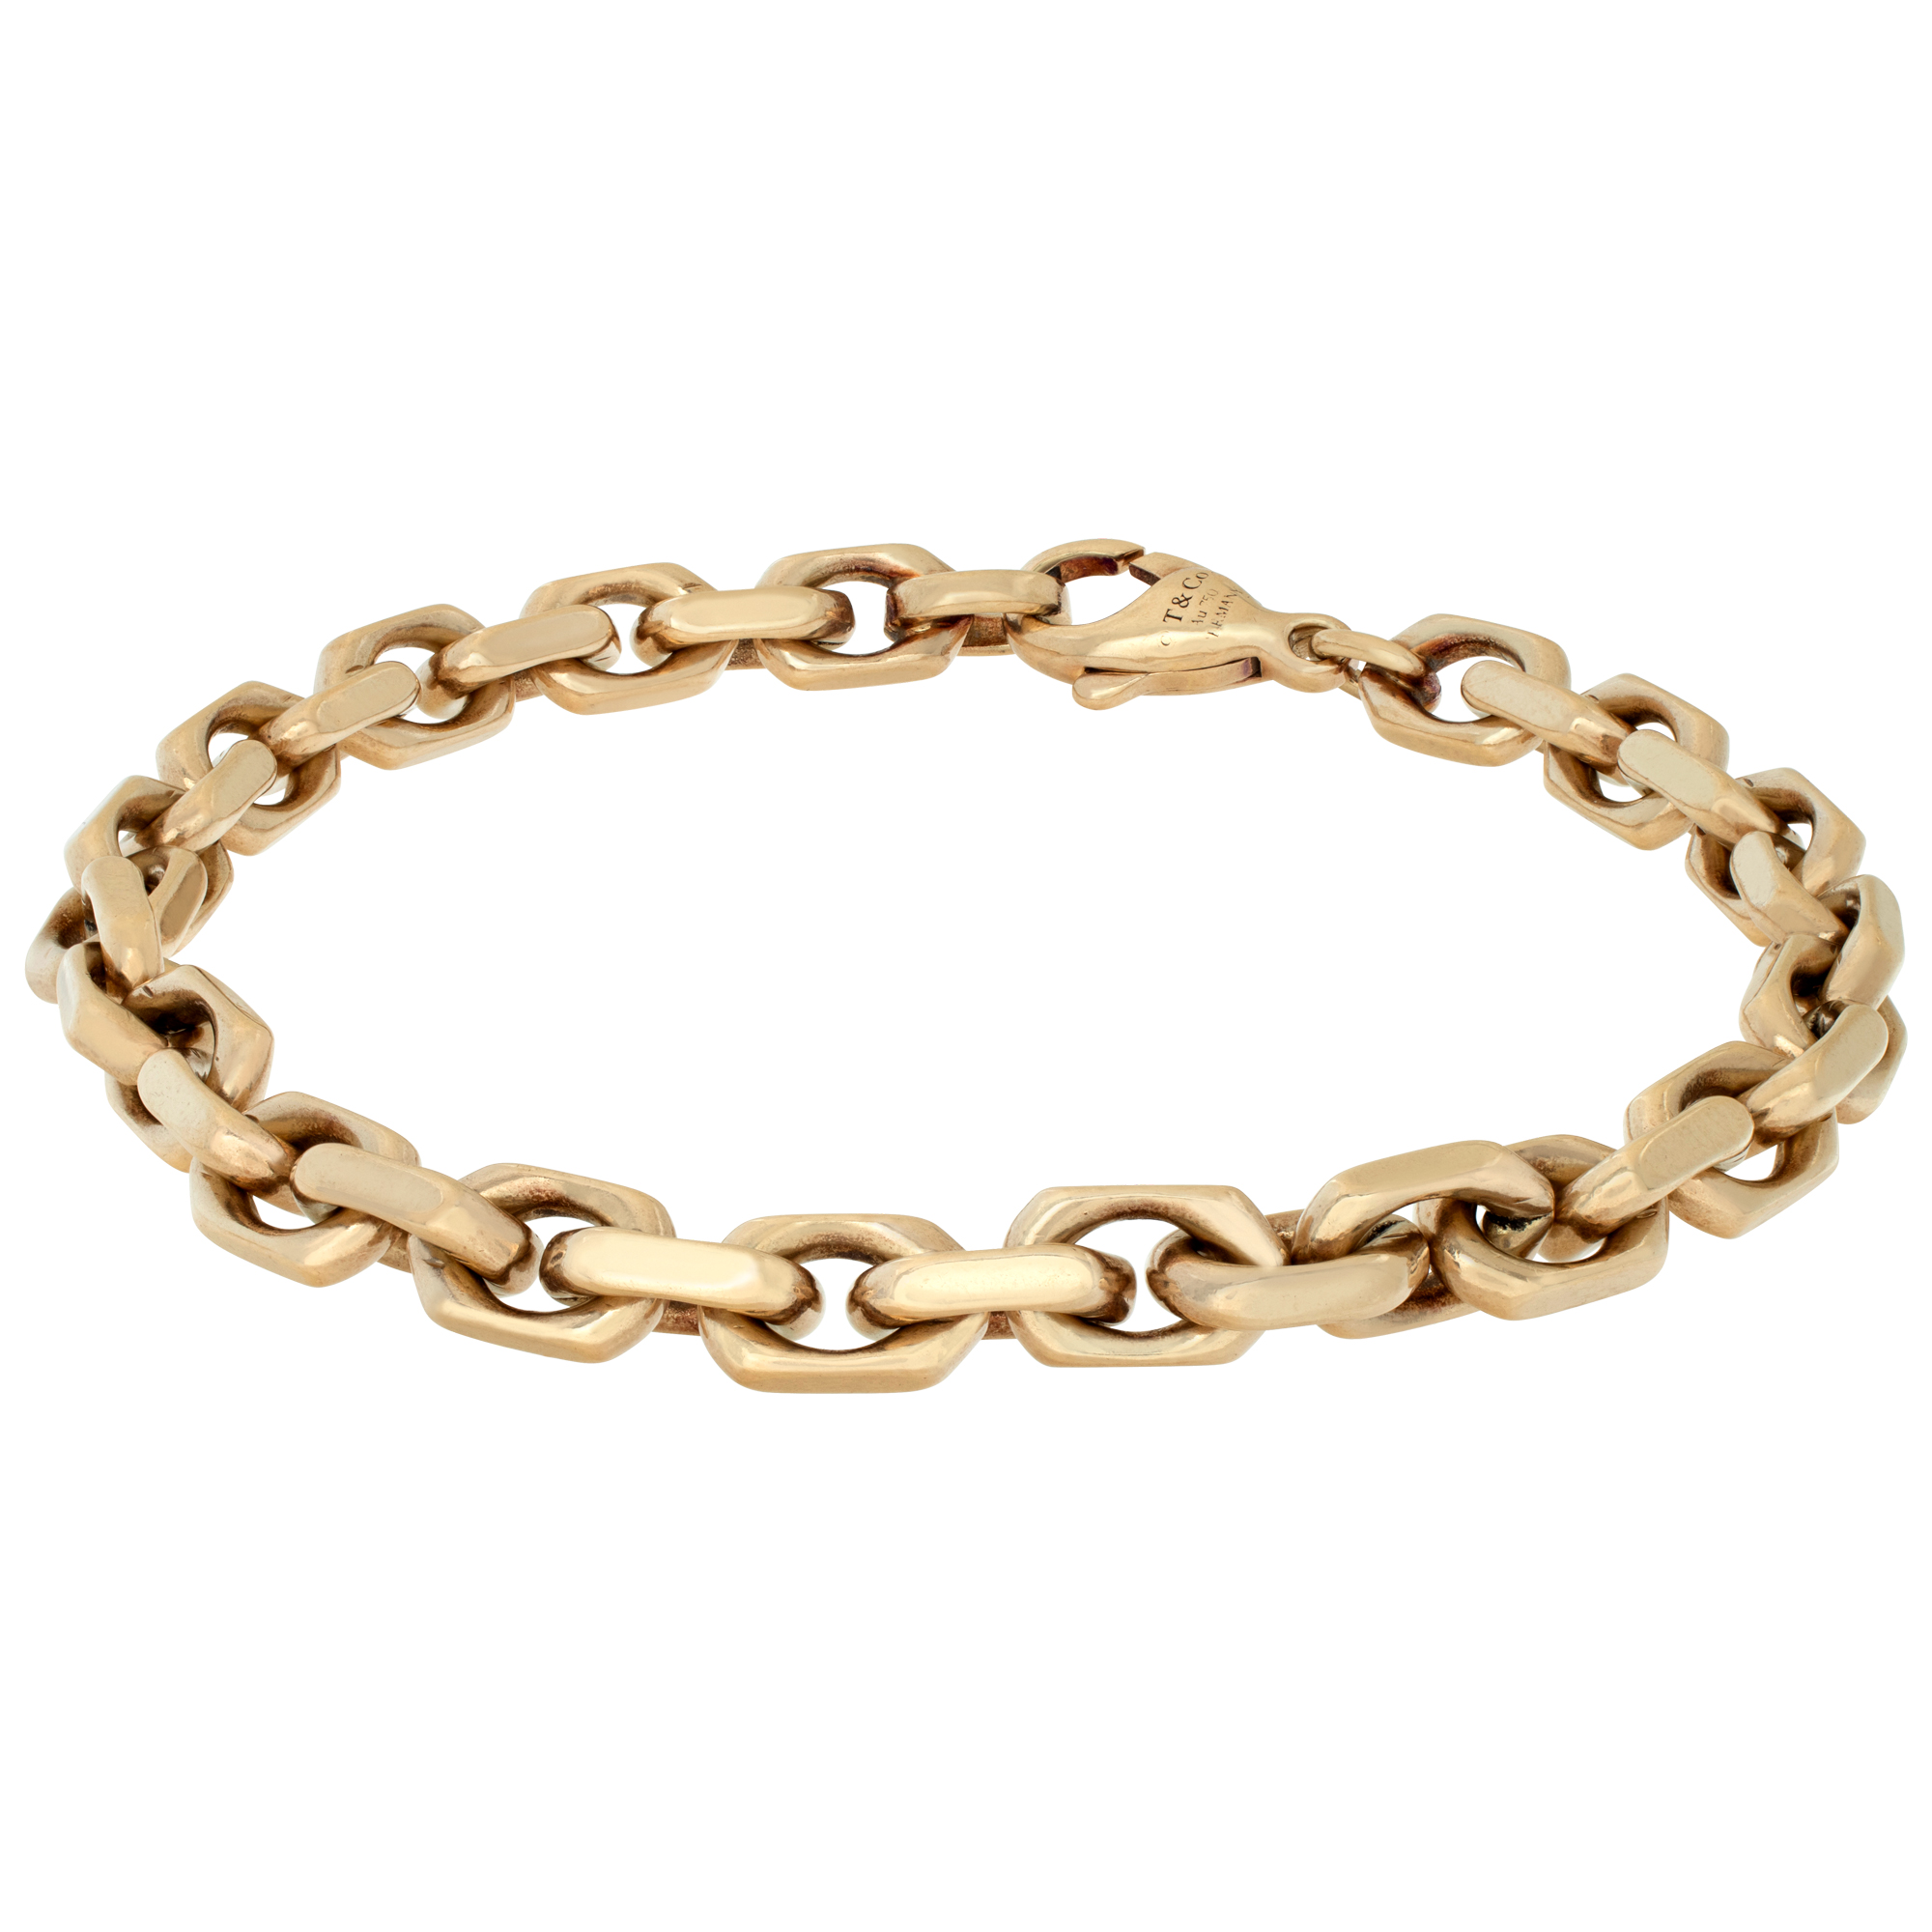 Tiffany and Co. link bracelet in 18k yellow gold. Measures 8.25 inches. (Default)